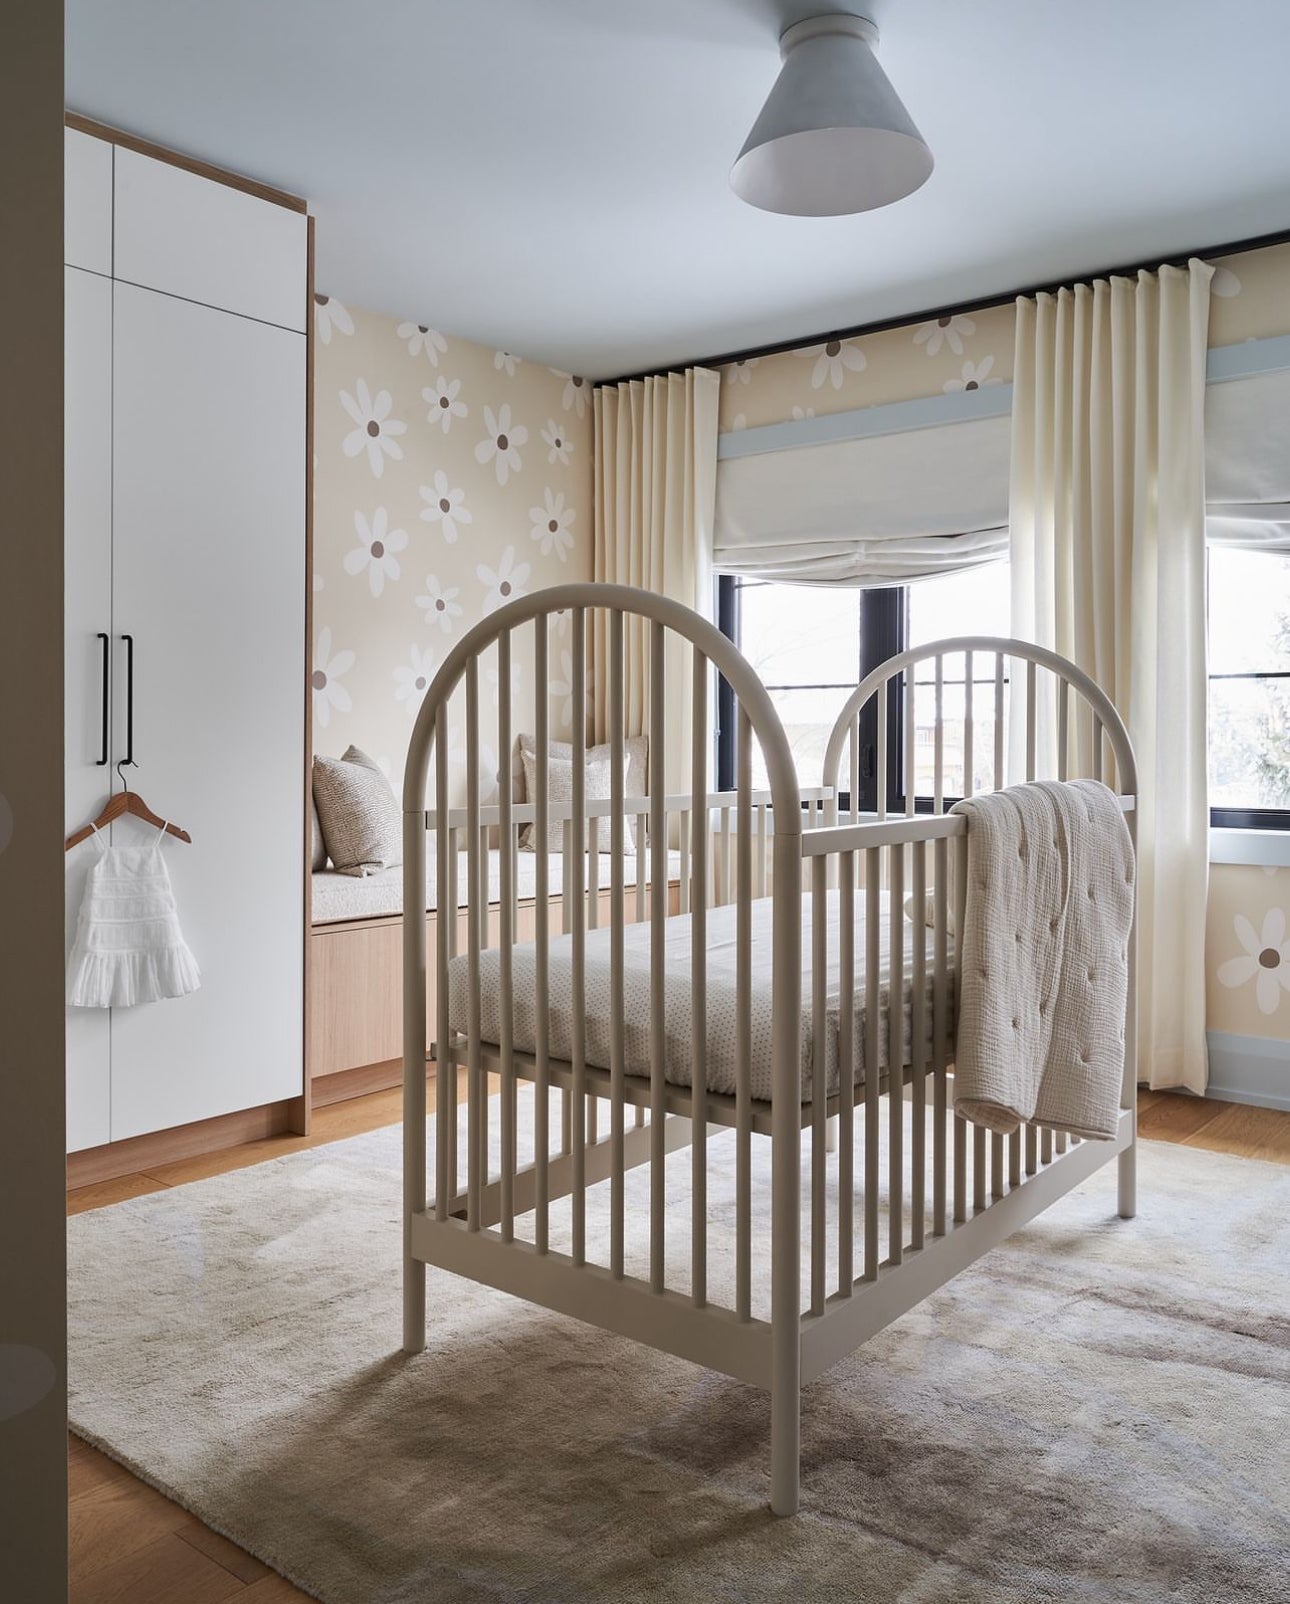 A spacious view of a nursery featuring the Simple Daisy Wallpaper. The room includes a white crib, matching curtains, and a cream rug, creating a calming and inviting atmosphere. The daisy pattern on the walls brings a playful and light-hearted feel to the room.